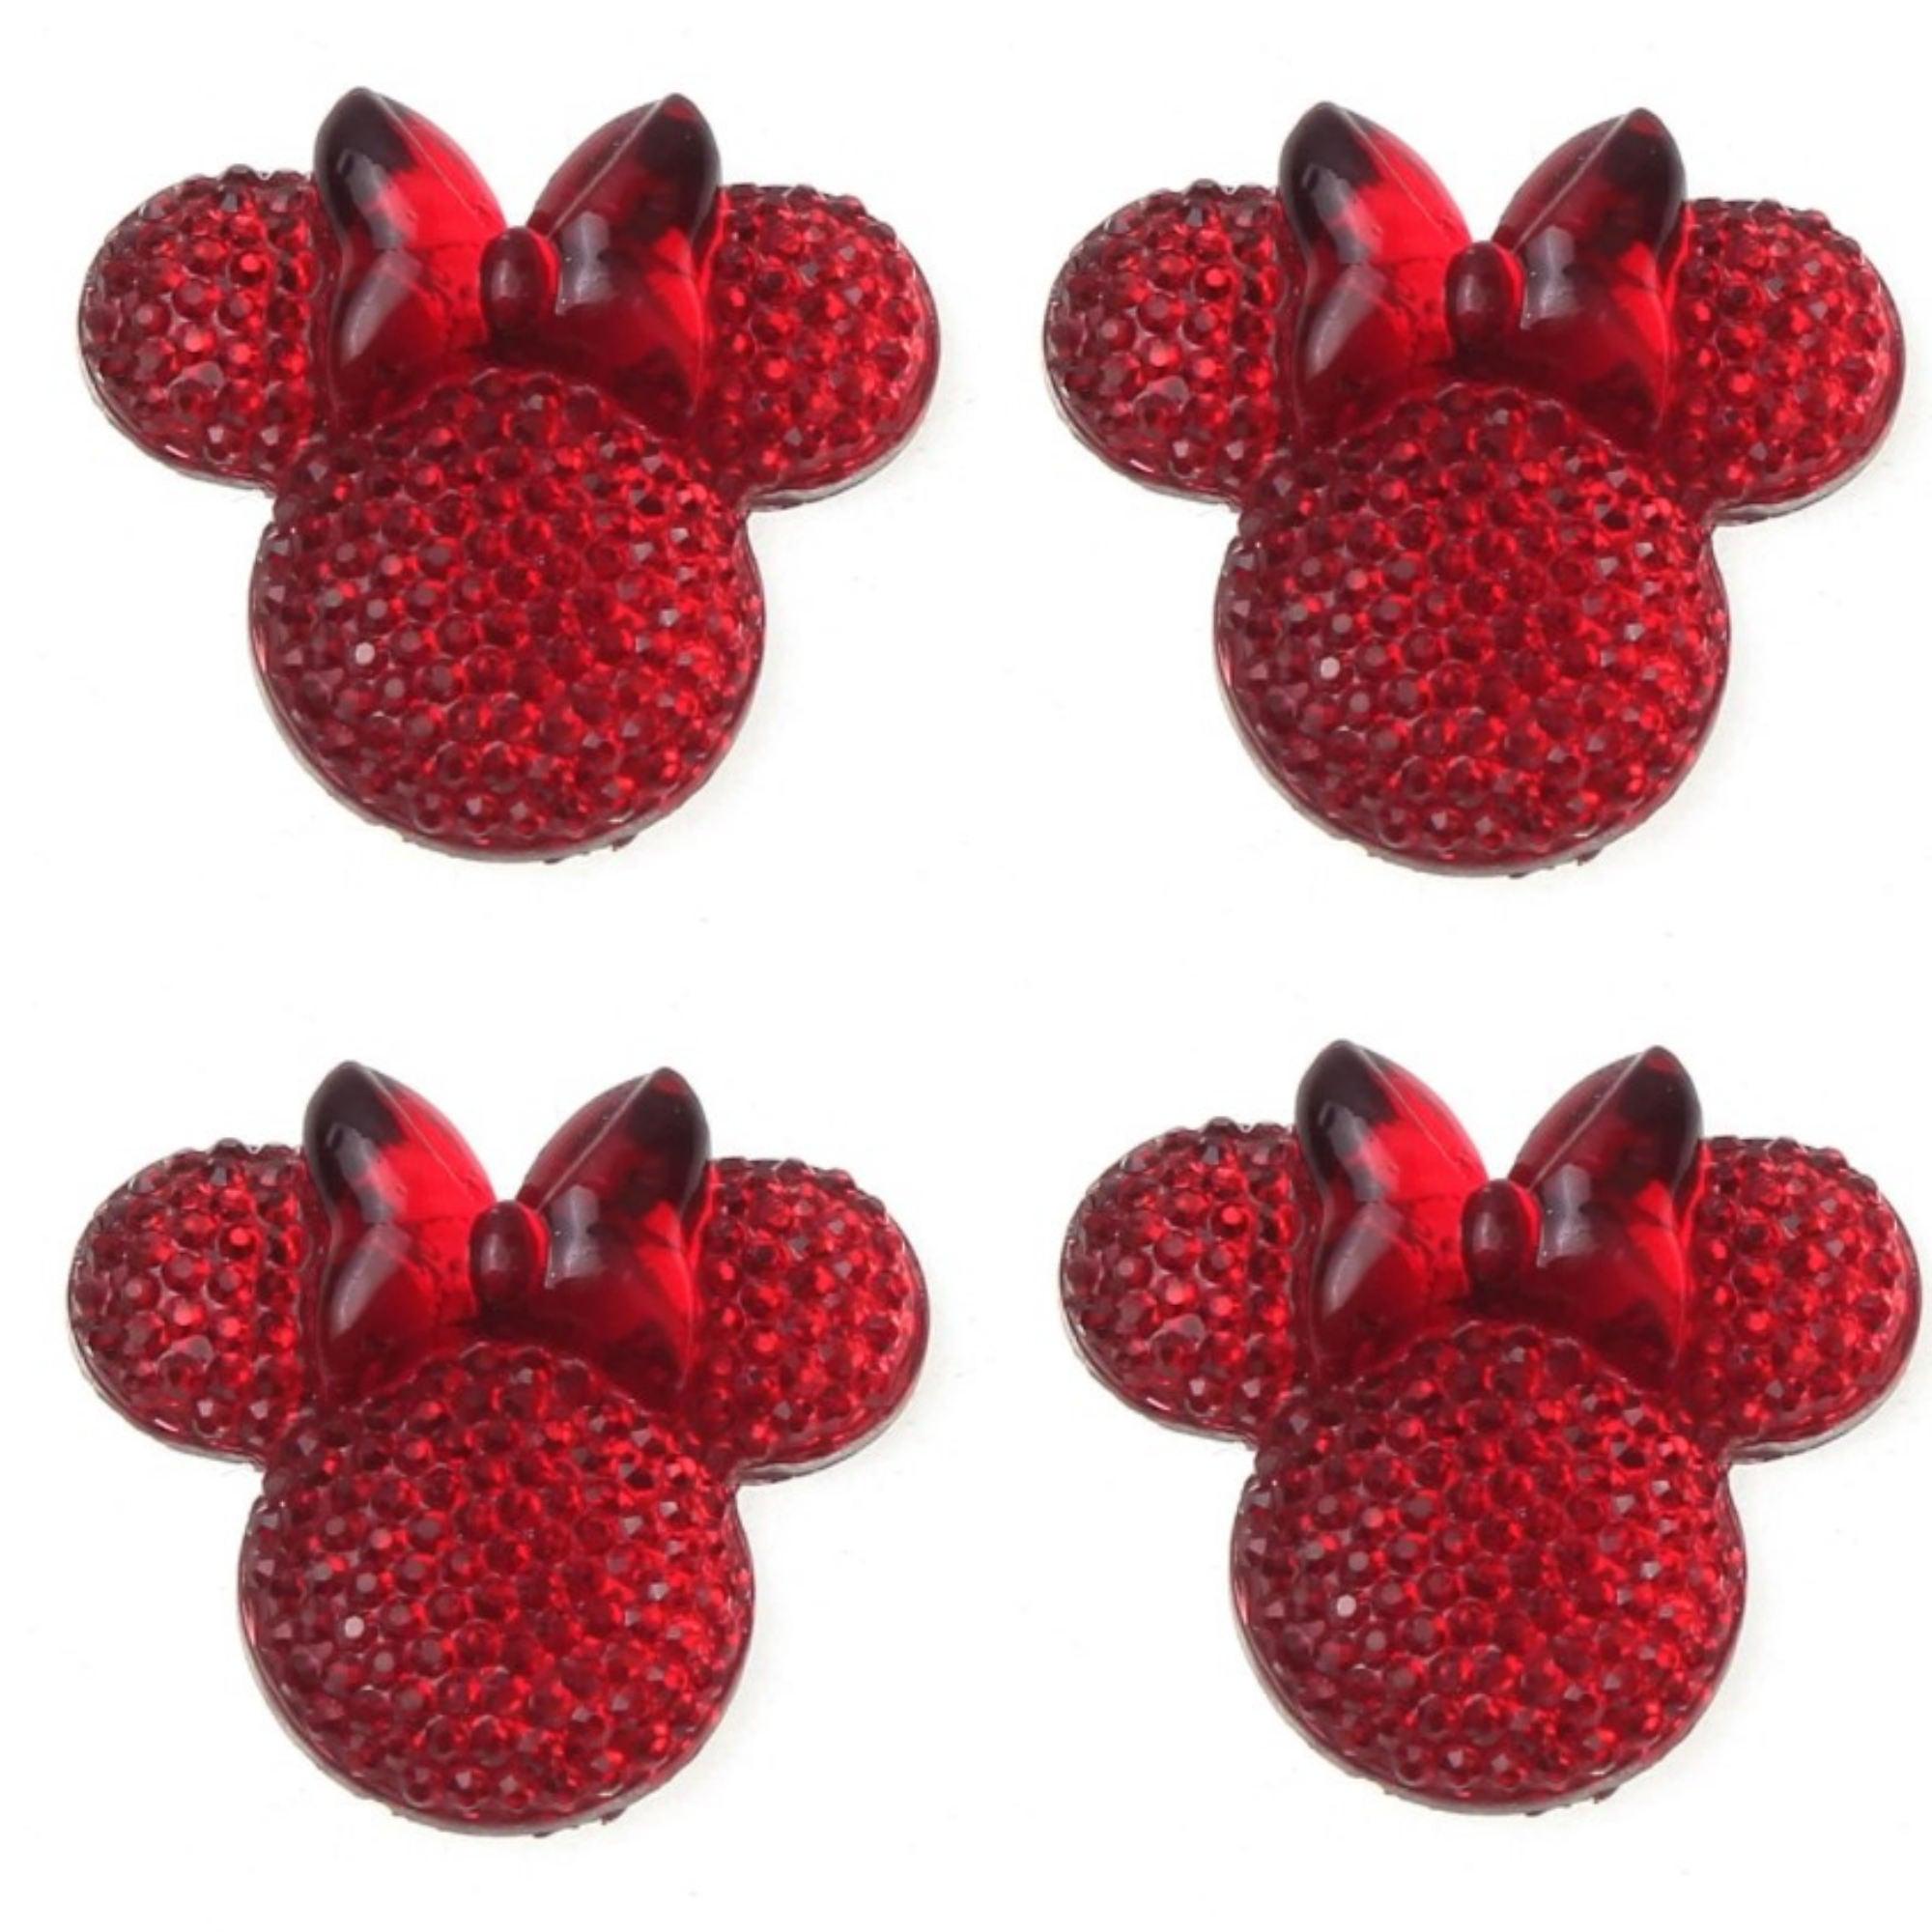 Disneyana Collection 1" Bling Red Mouse Ears & Bow Scrapbook Embellishments by SSC Designs - 4 Pieces